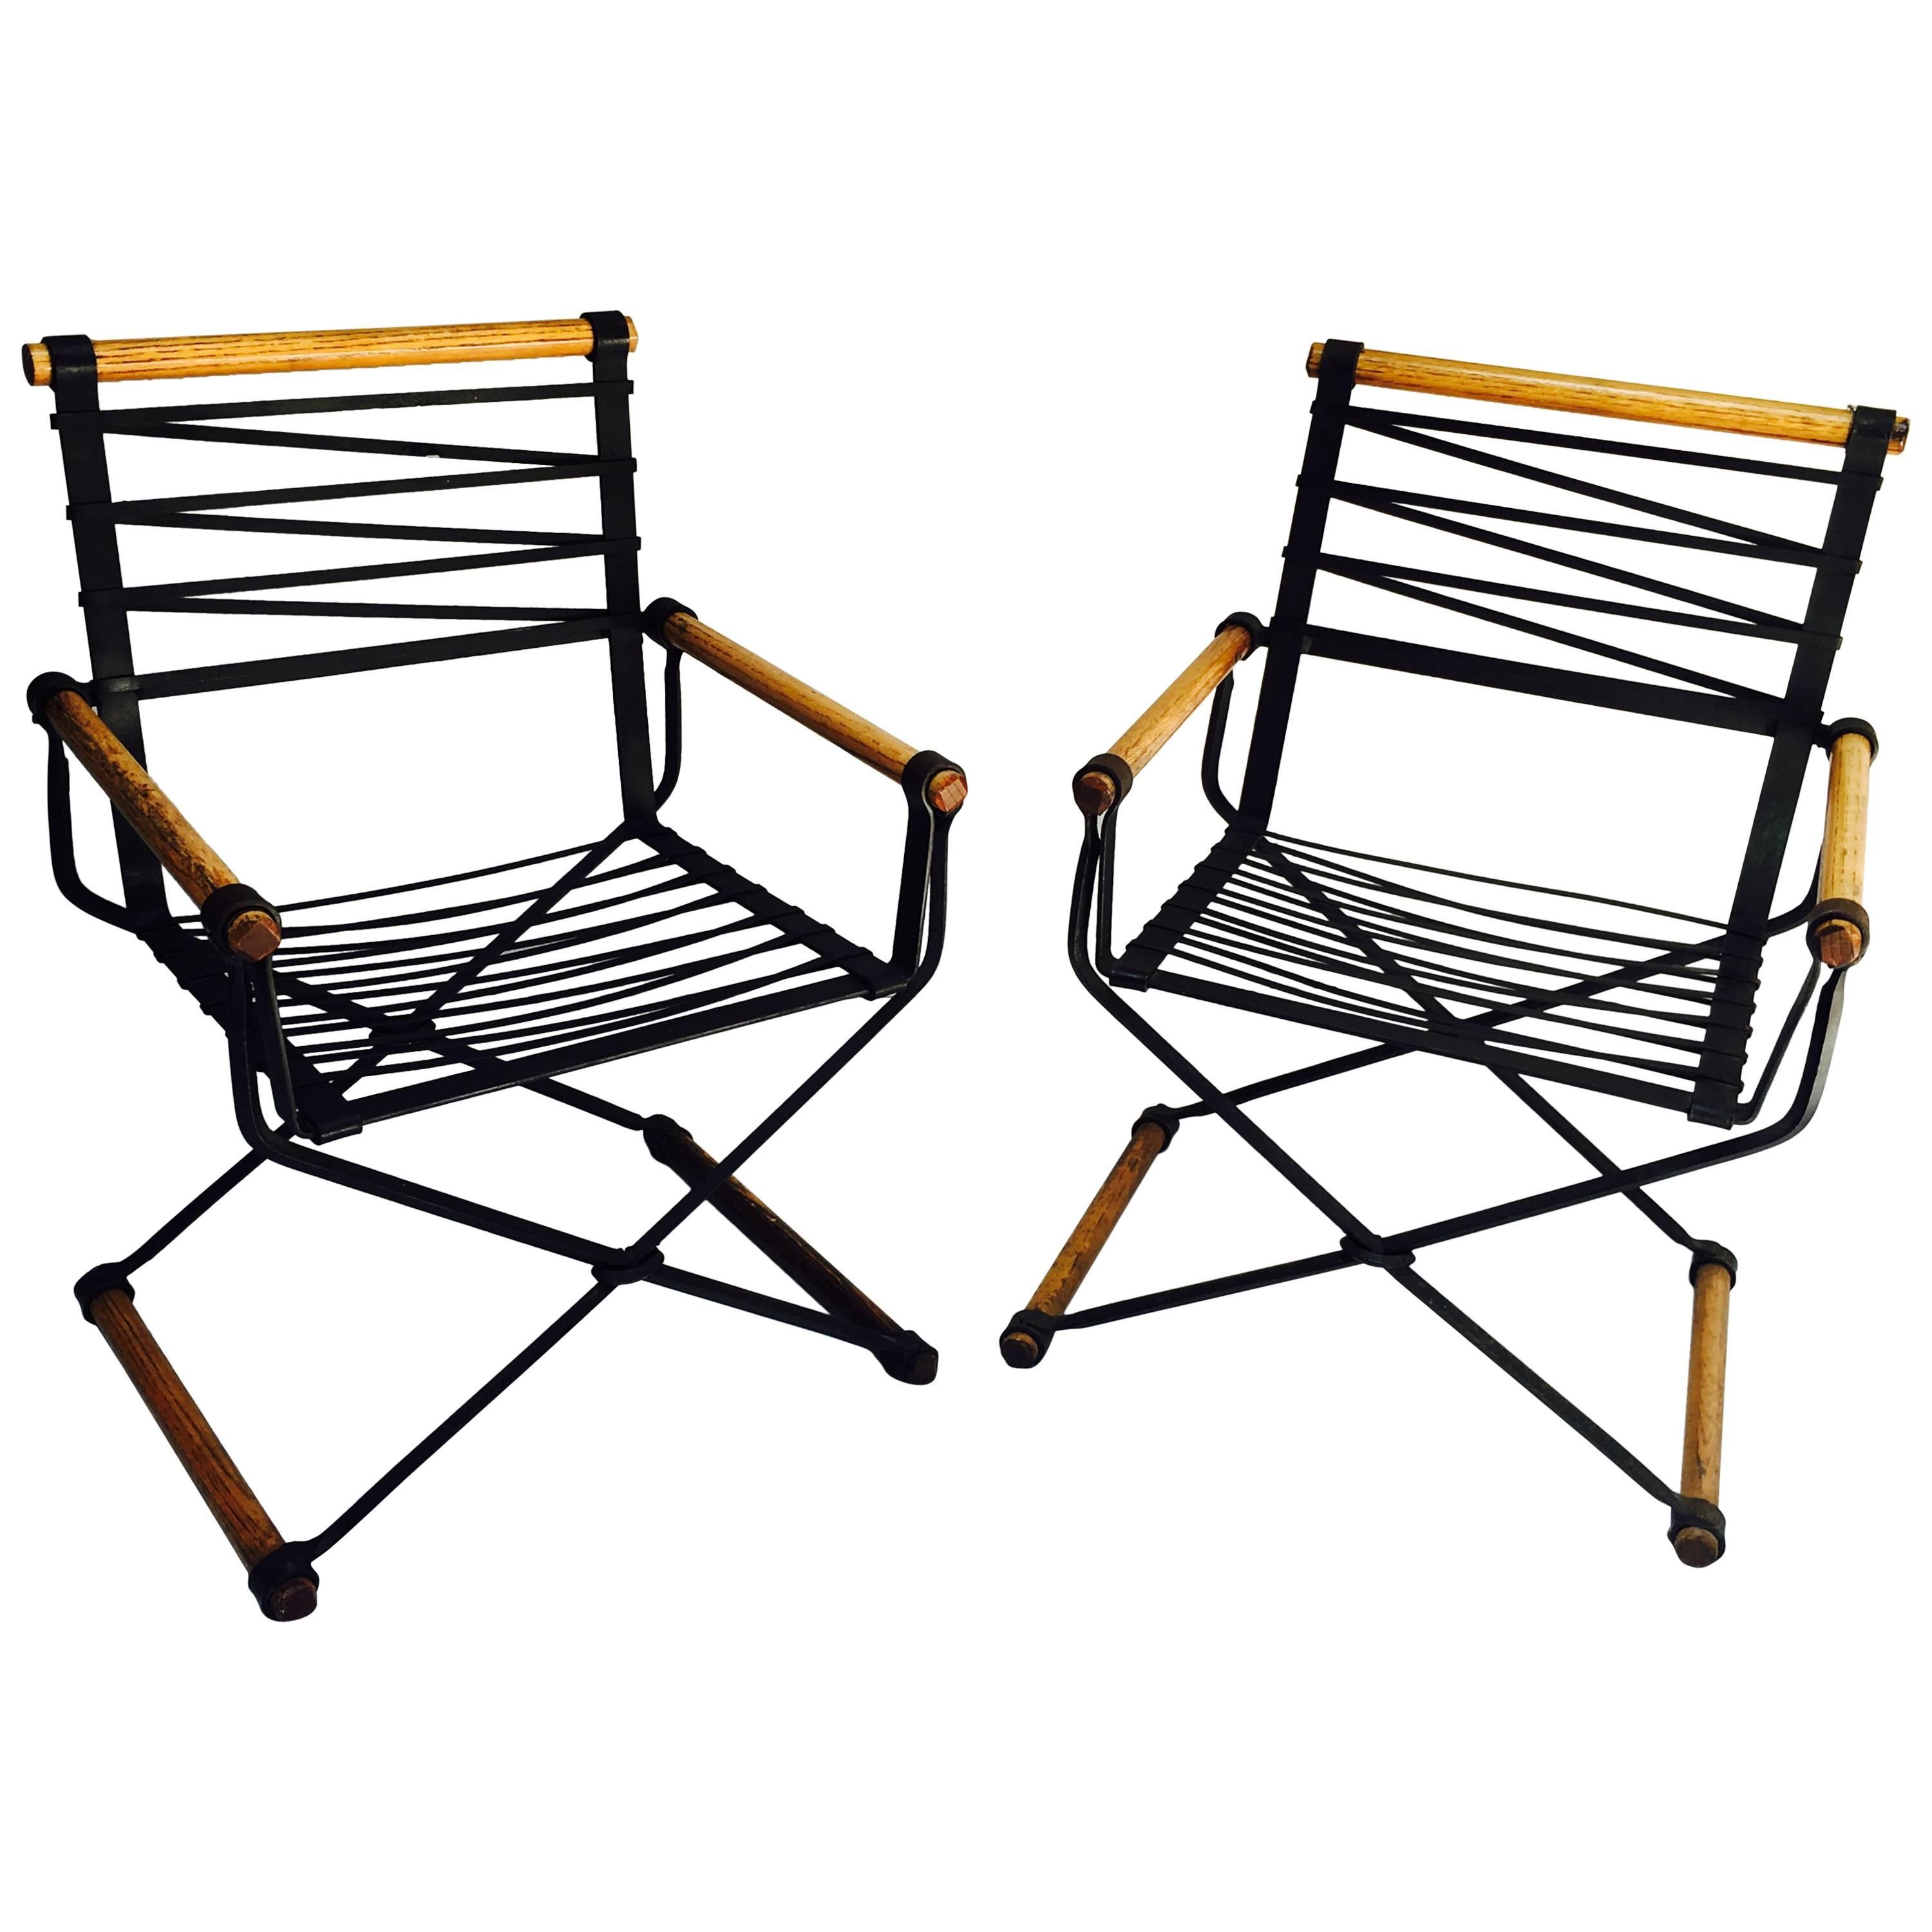 A pair of handcrafted wrought iron armchairs designed by Cleo Baldon and produced at her studio/work shop Terra in the 1960s.
The chairs and their cushions are in excellent condition.
 